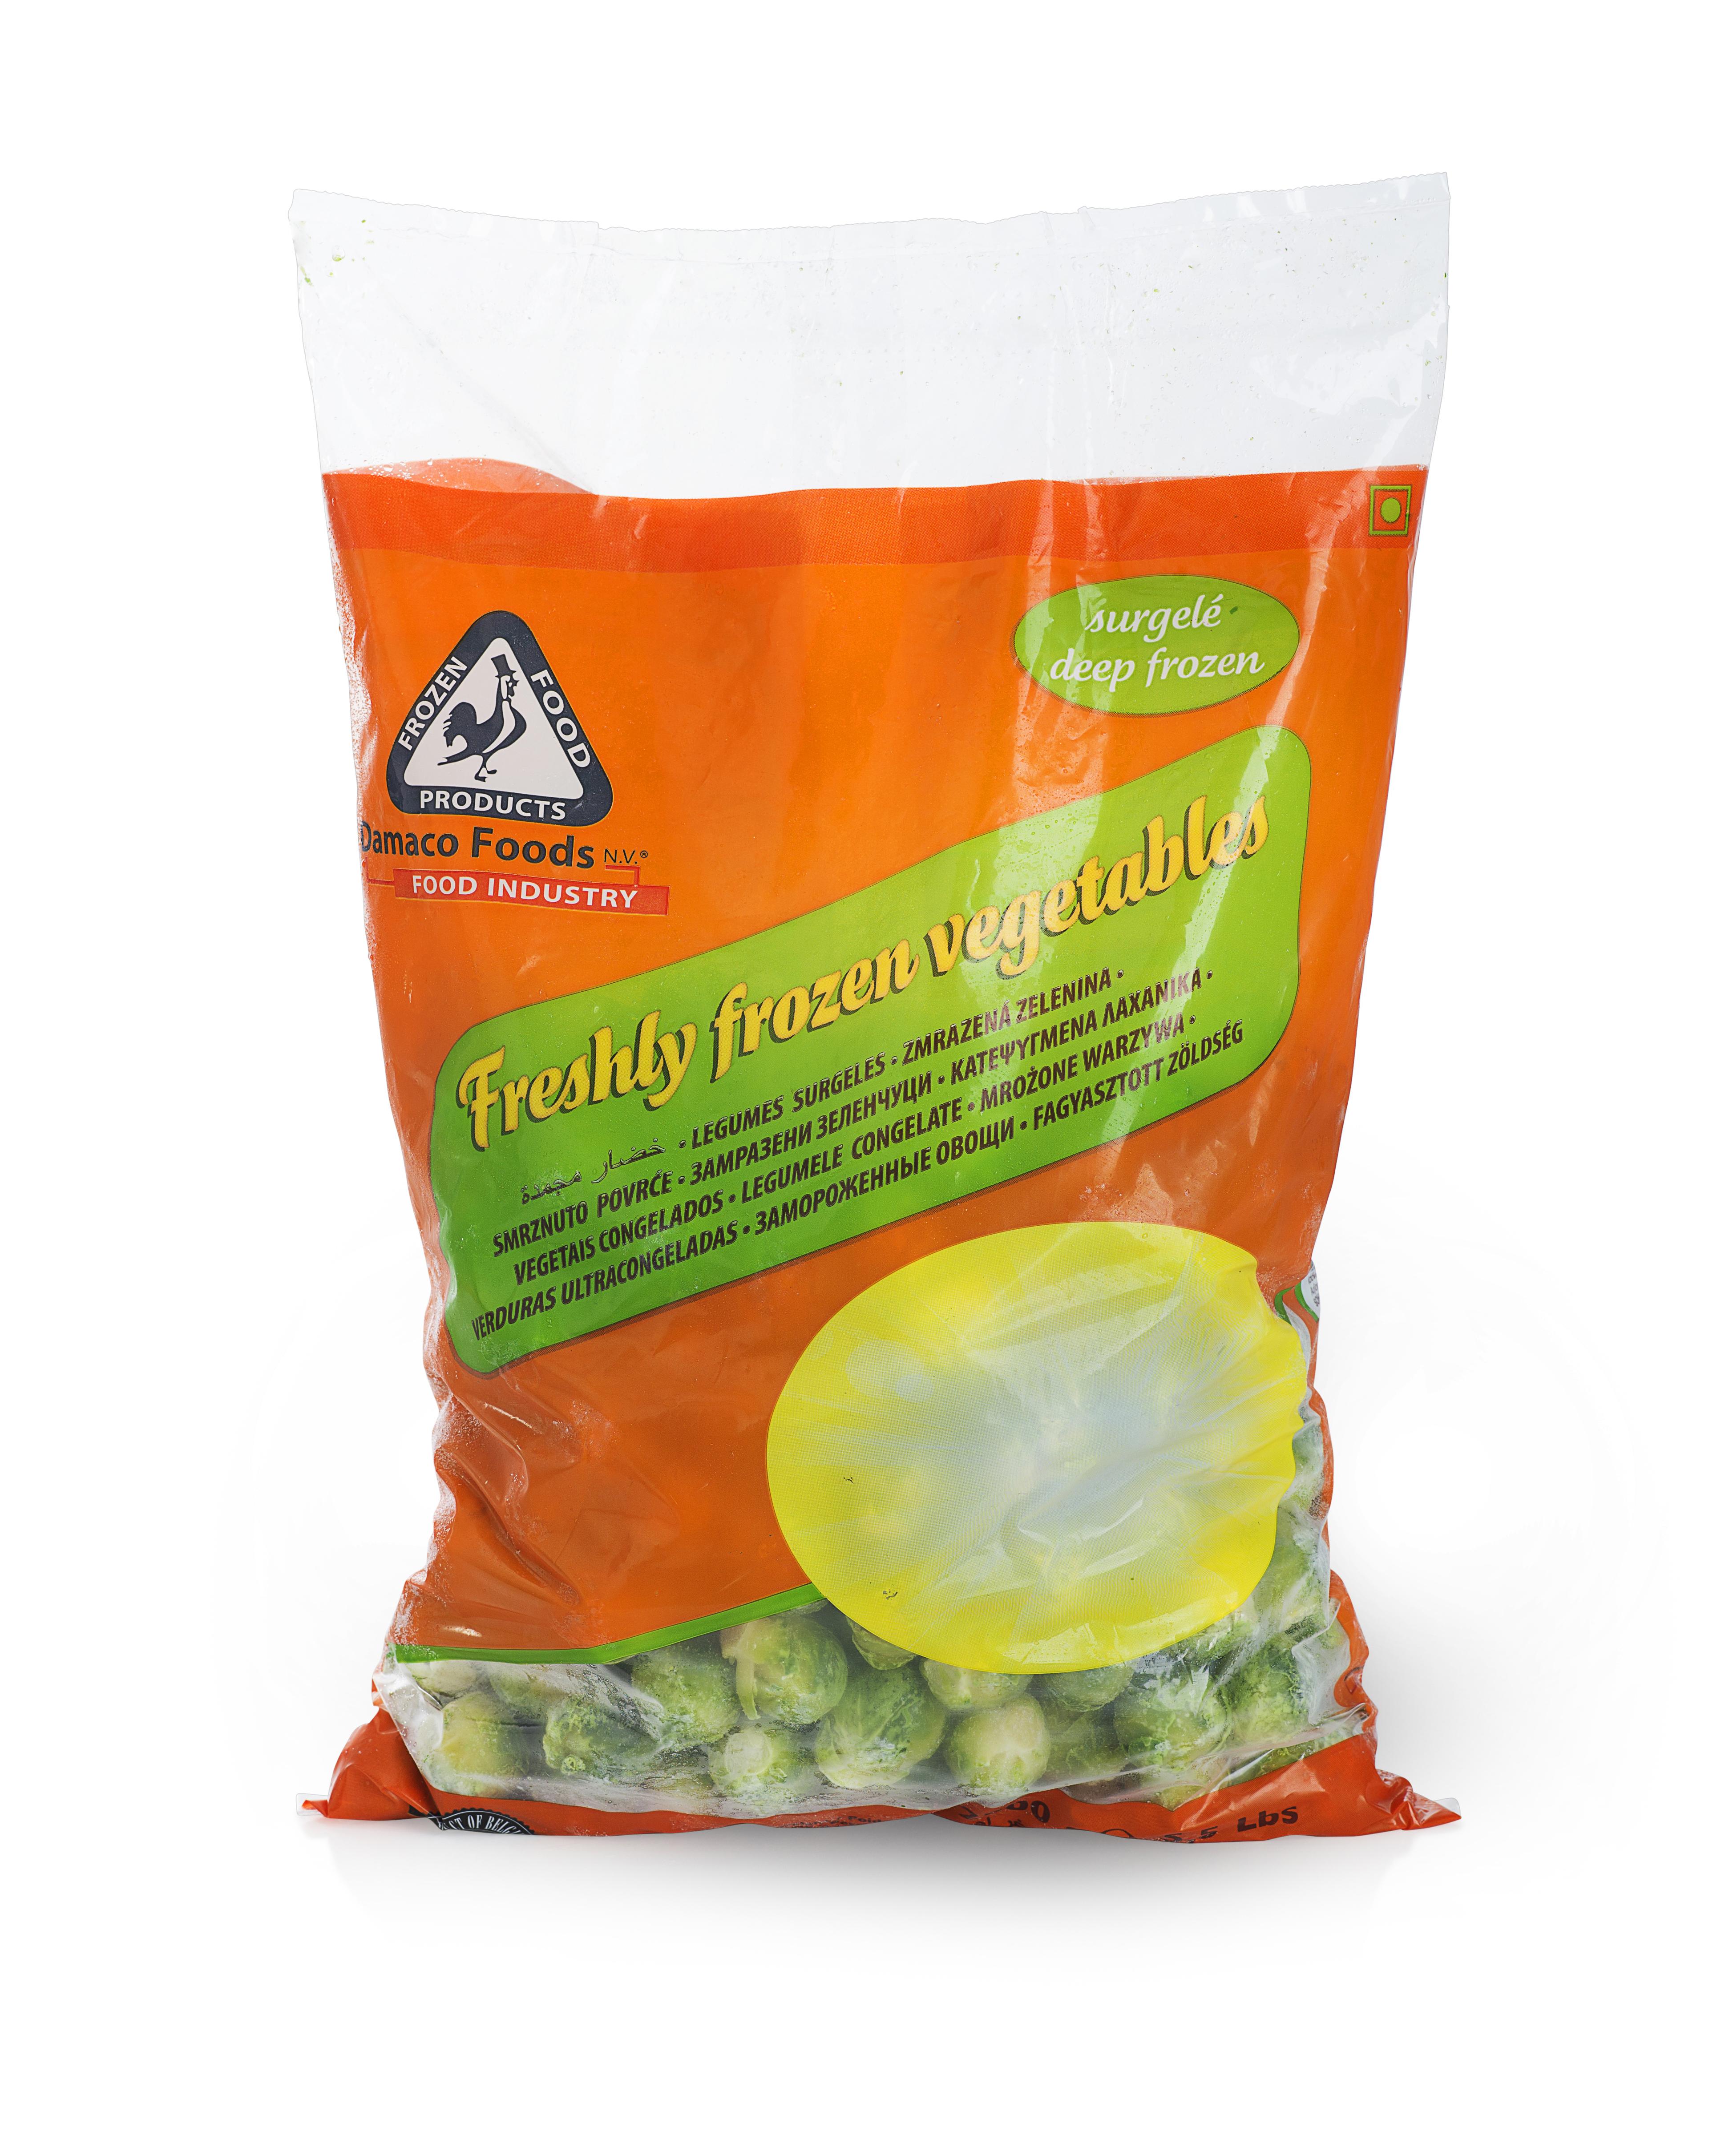 brussels sprouts damaco brand packaging